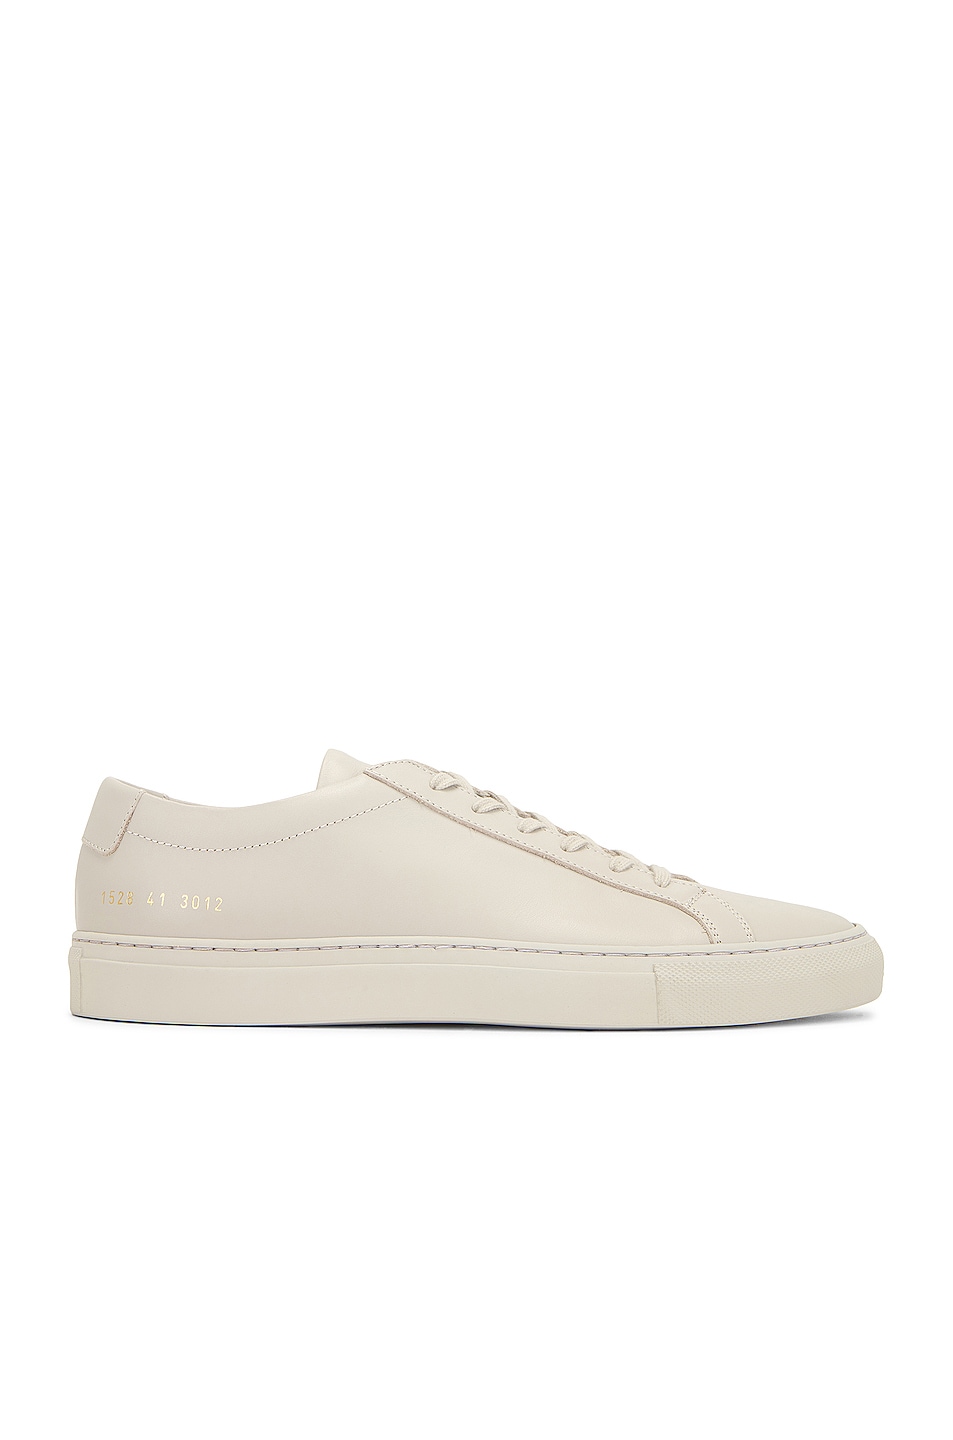 Image 1 of Common Projects Original Achilles Low Article 1528 in Carta